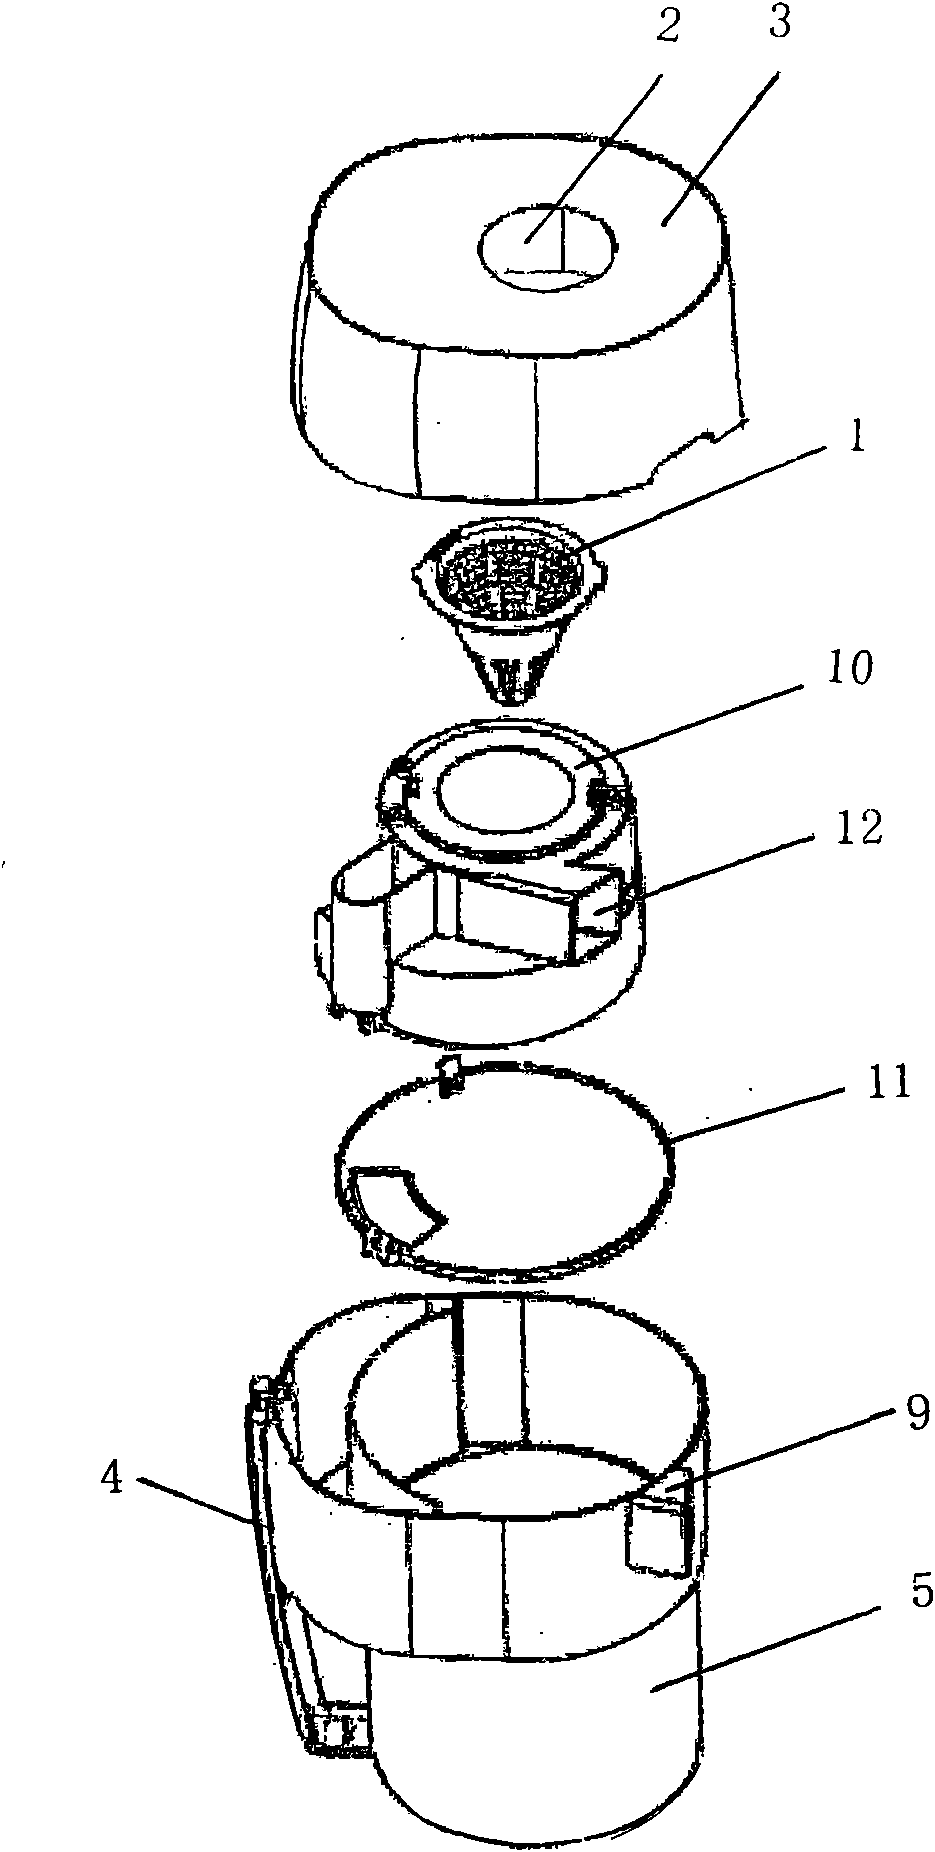 Dust collecting barrel with separated part